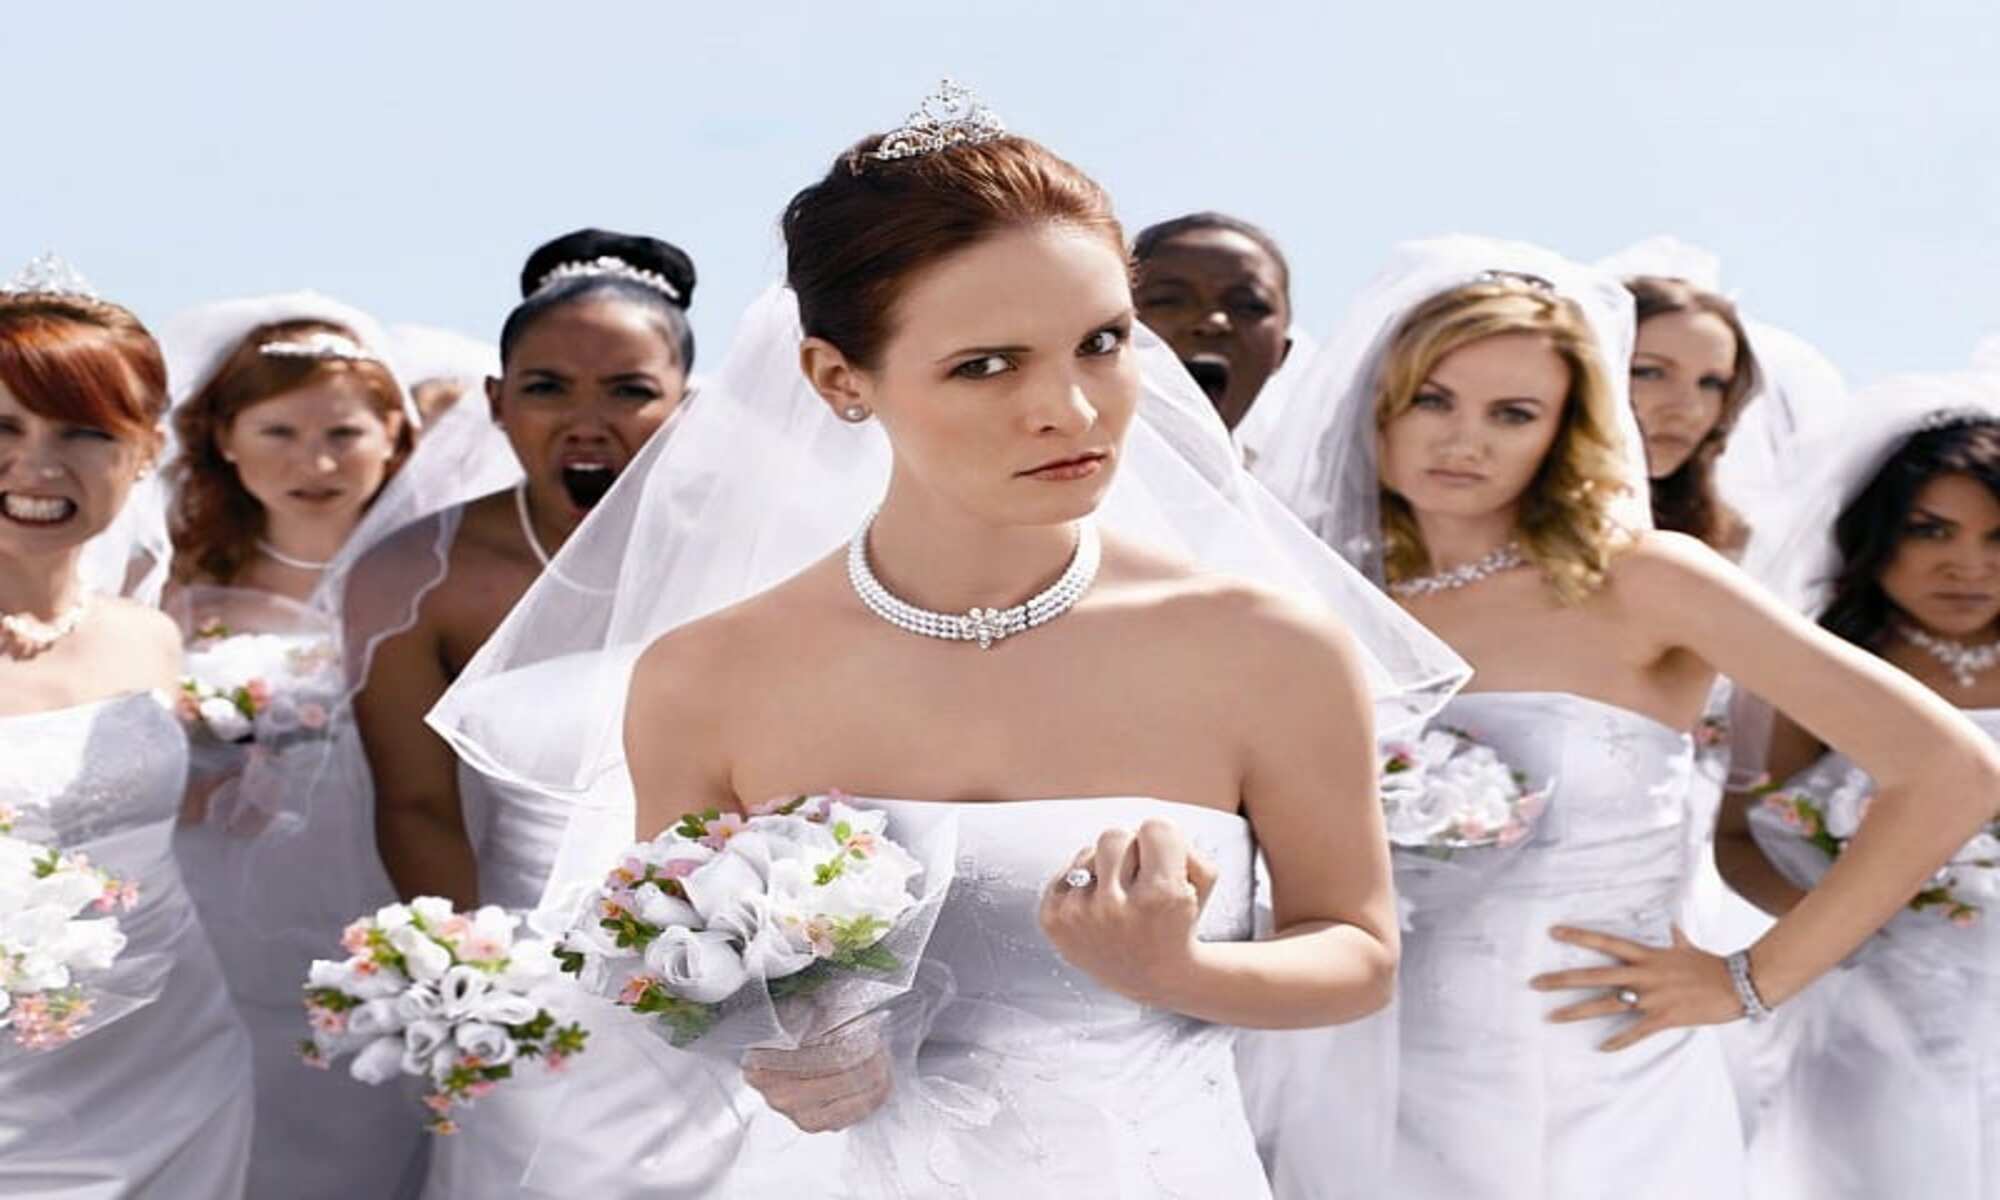 The brides of Bridezilla on WE TV speak facts about the show.